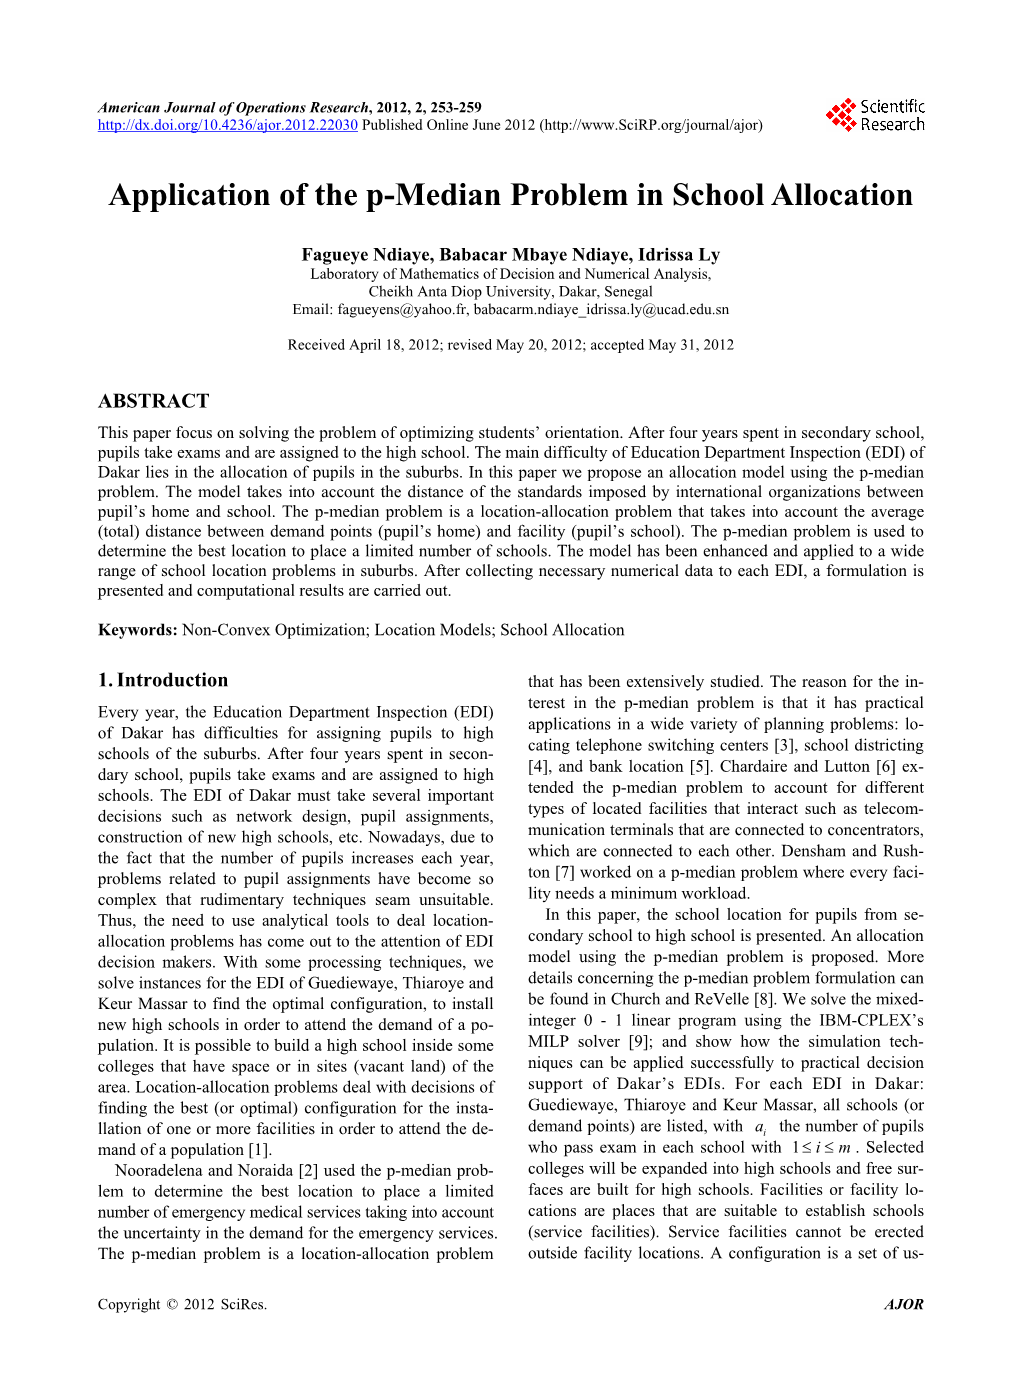 Application of the P-Median Problem in School Allocation